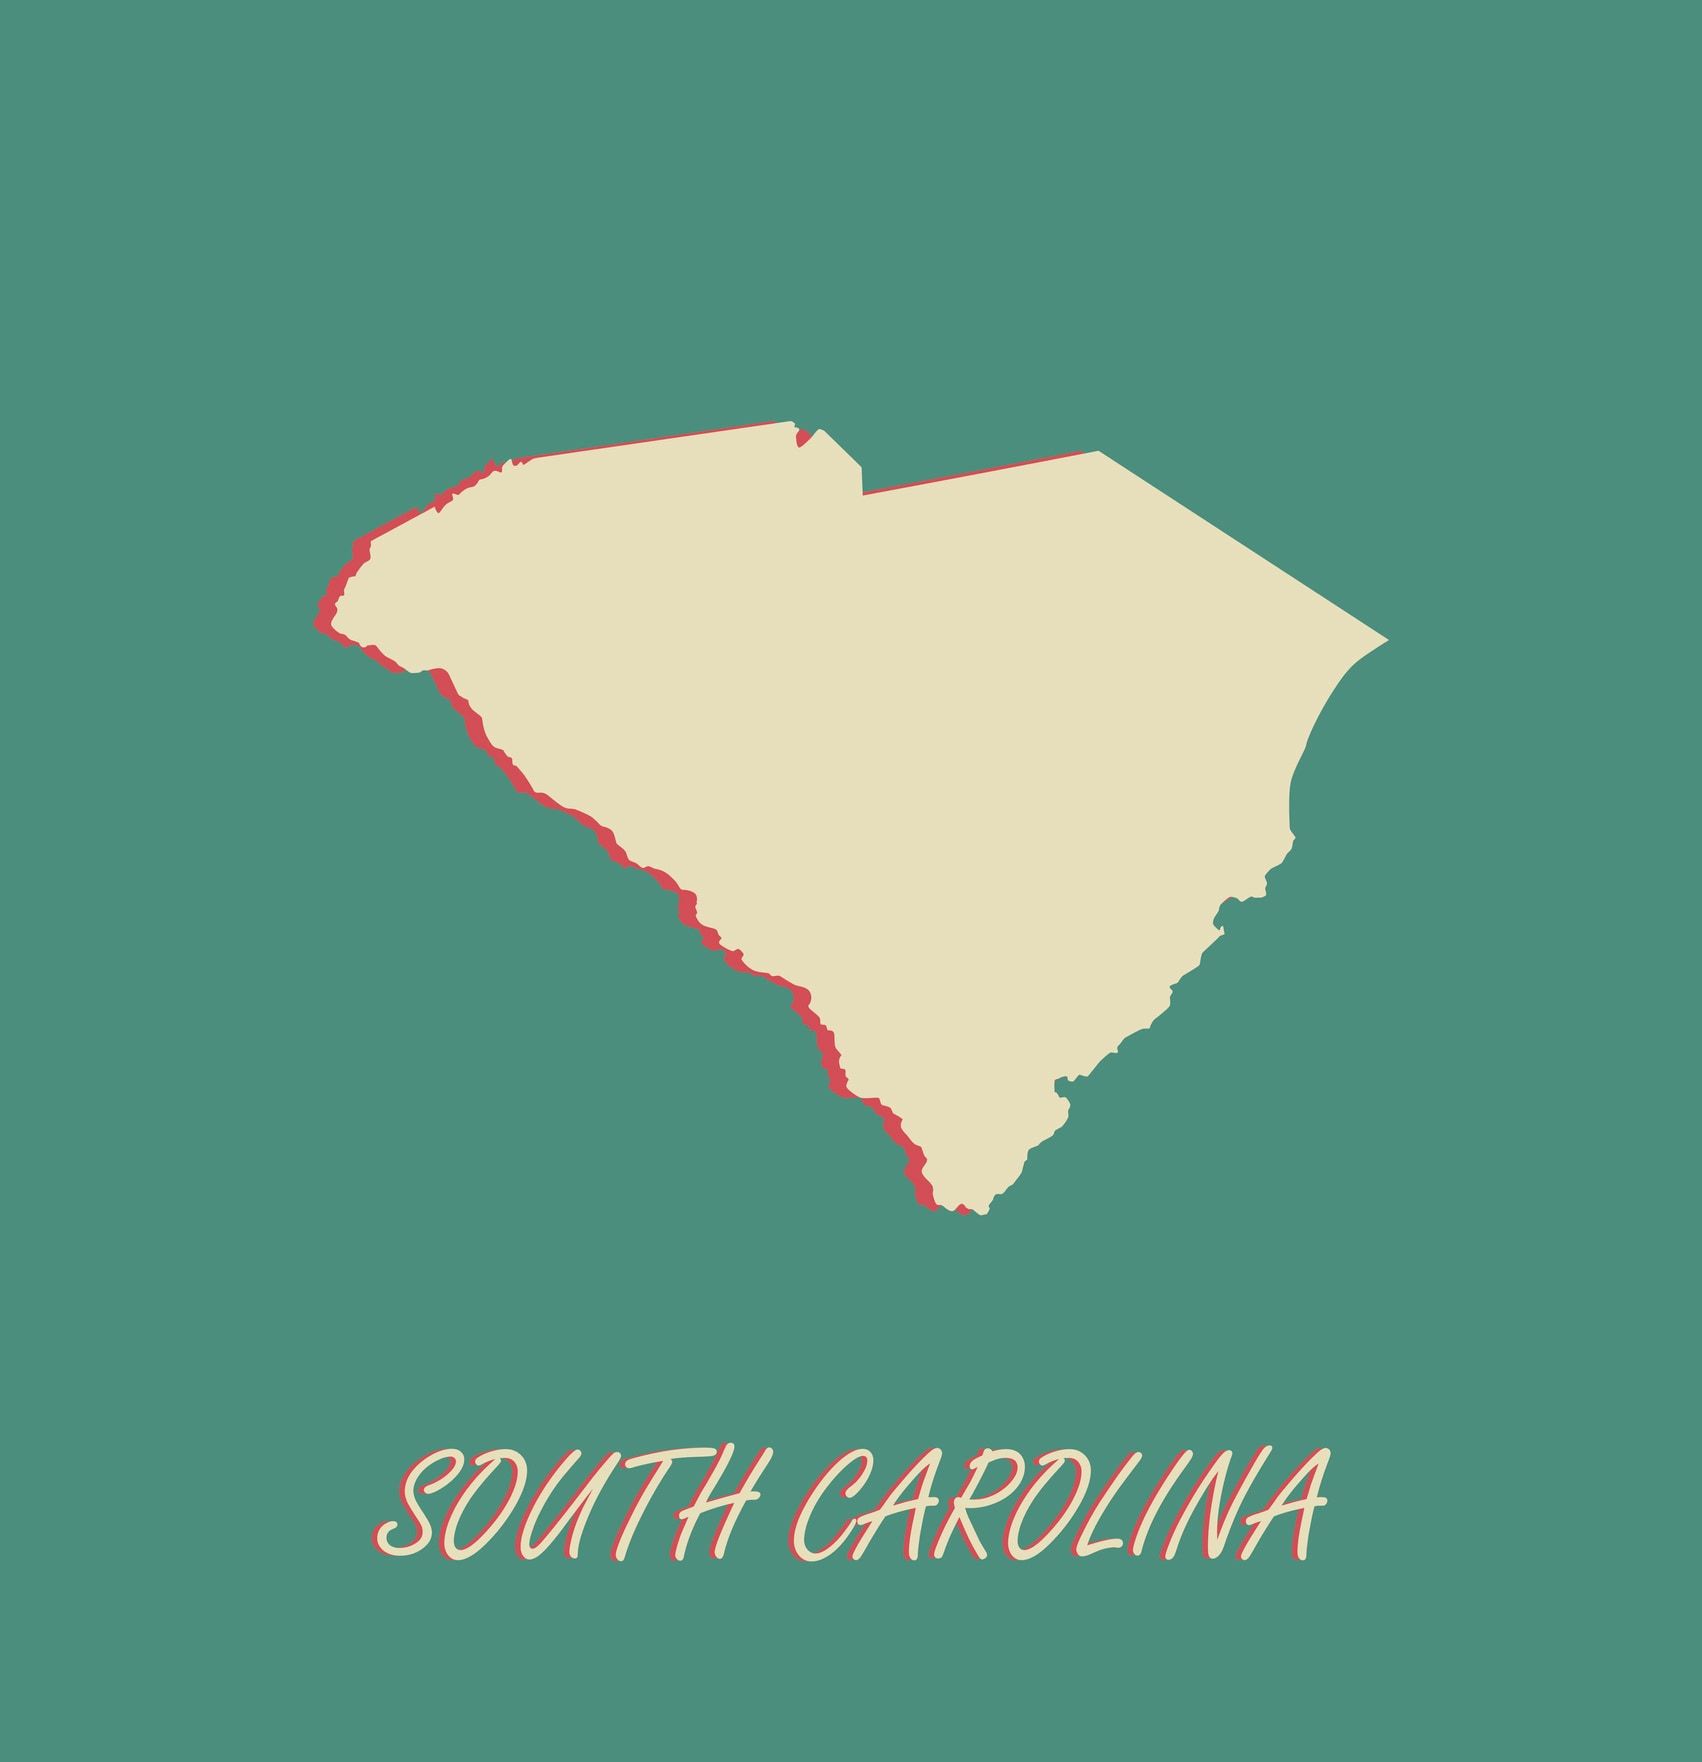 South Carolina household employment tax and labor law guide